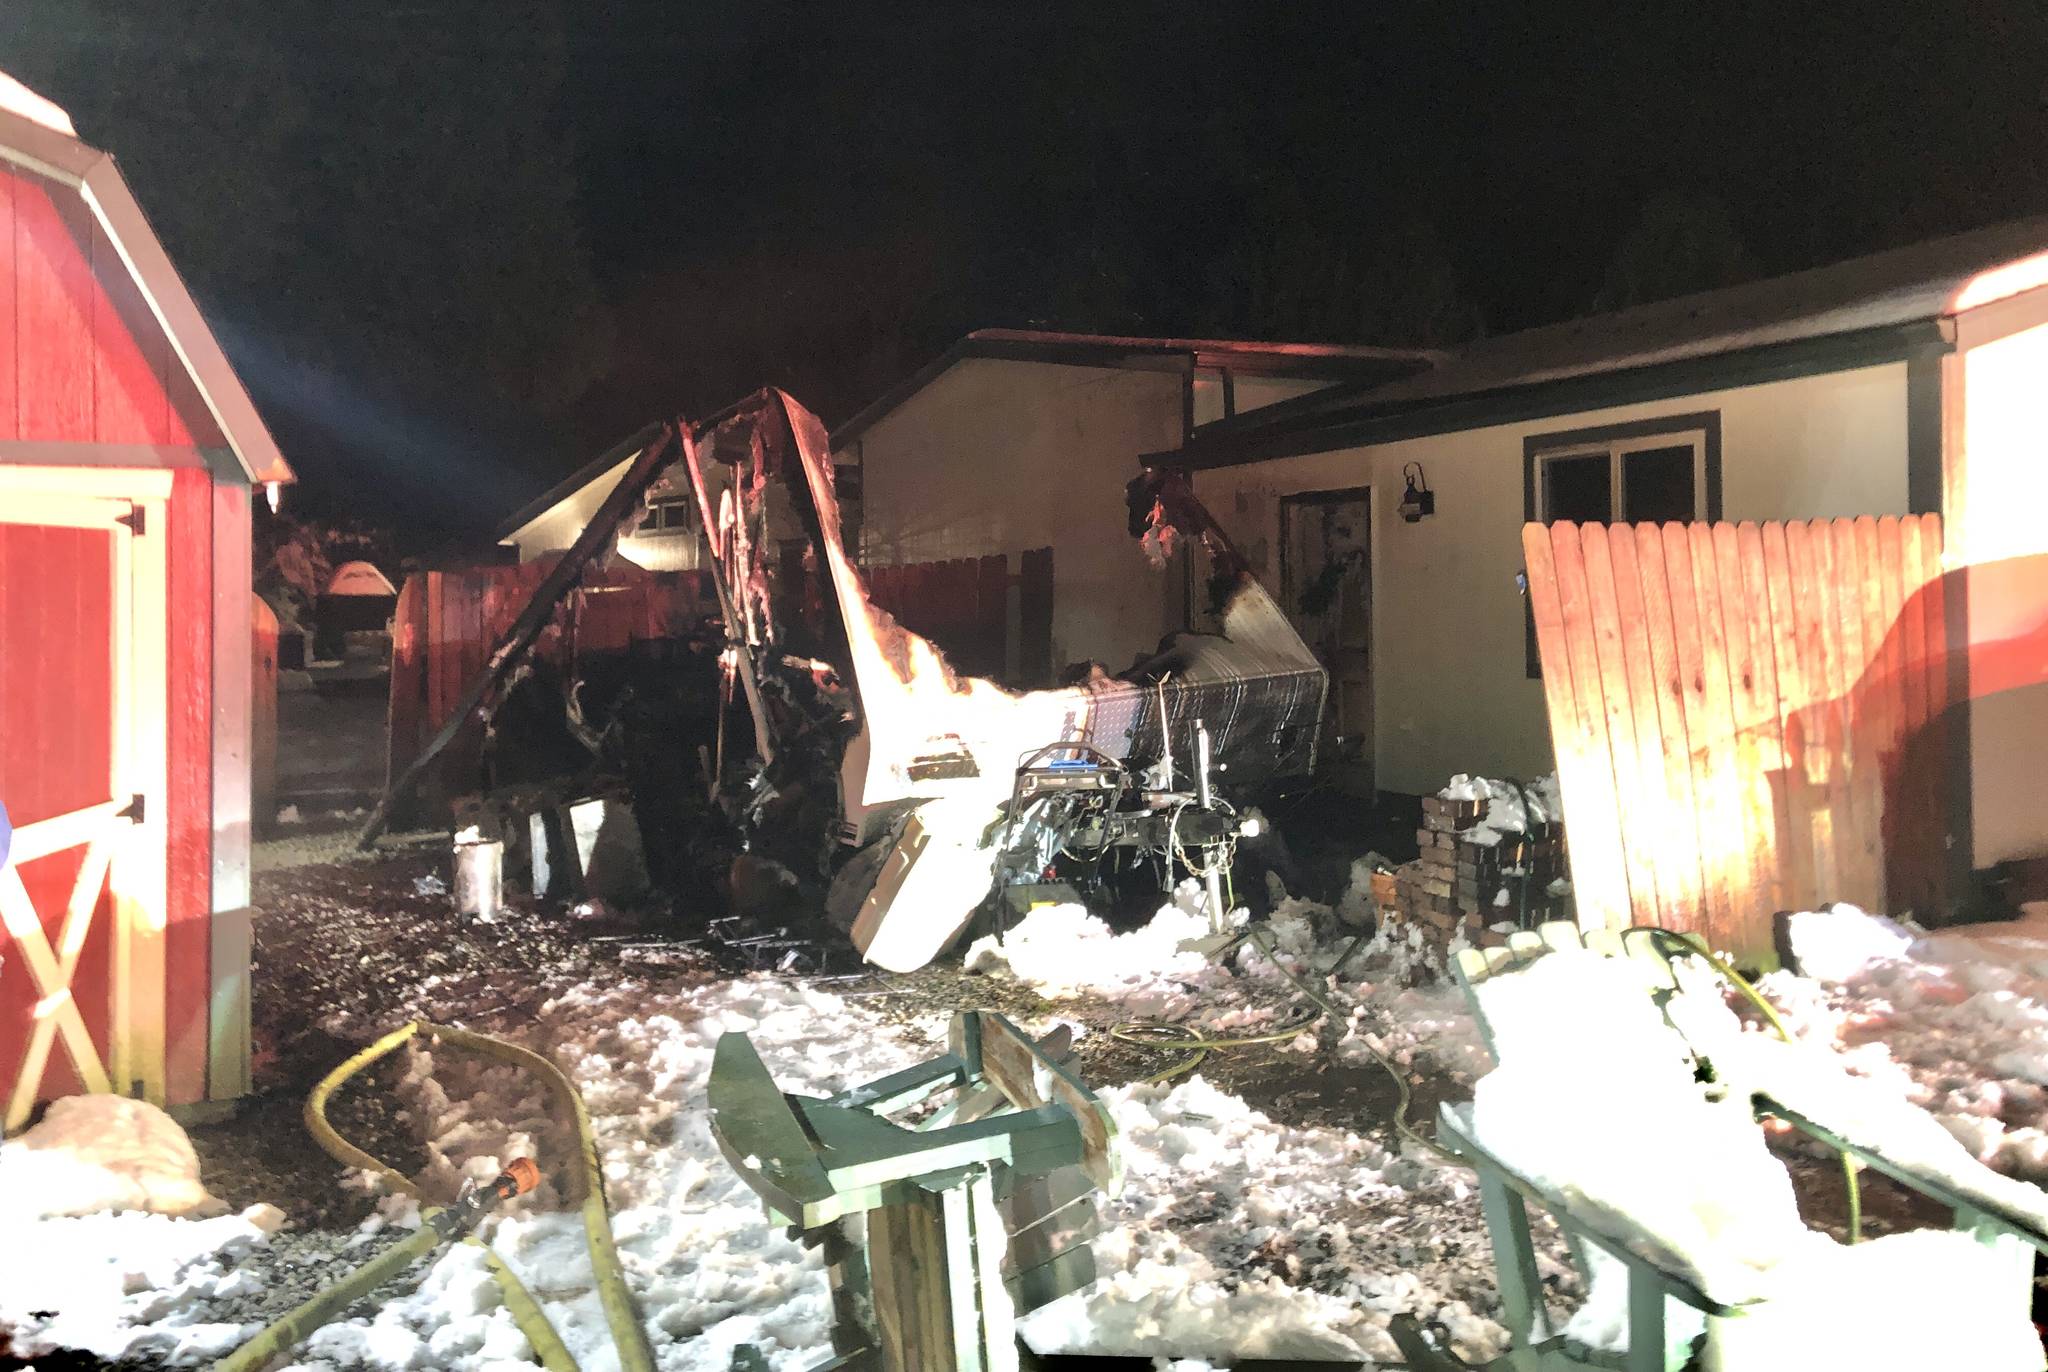 A fire Sunday evening fully engulfed a trailer at a Deer Lake Road residence. No one was injured. Photo provided by South Whidbey Fire/EMS